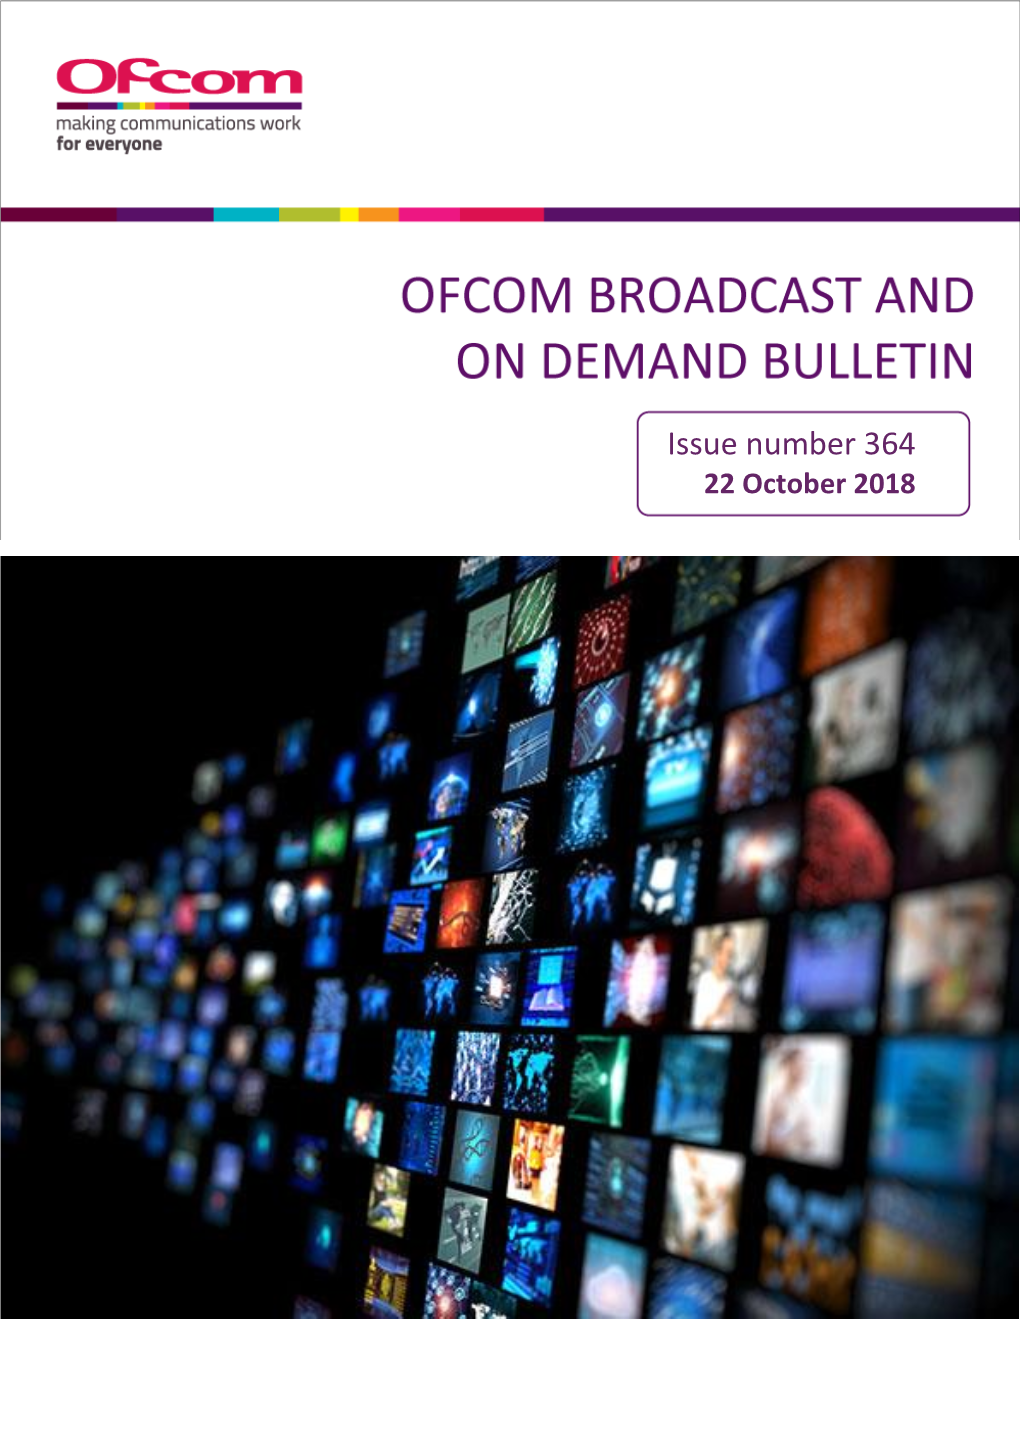 Issue 364 of Ofcom's Broadcast and on Demand Bulletin